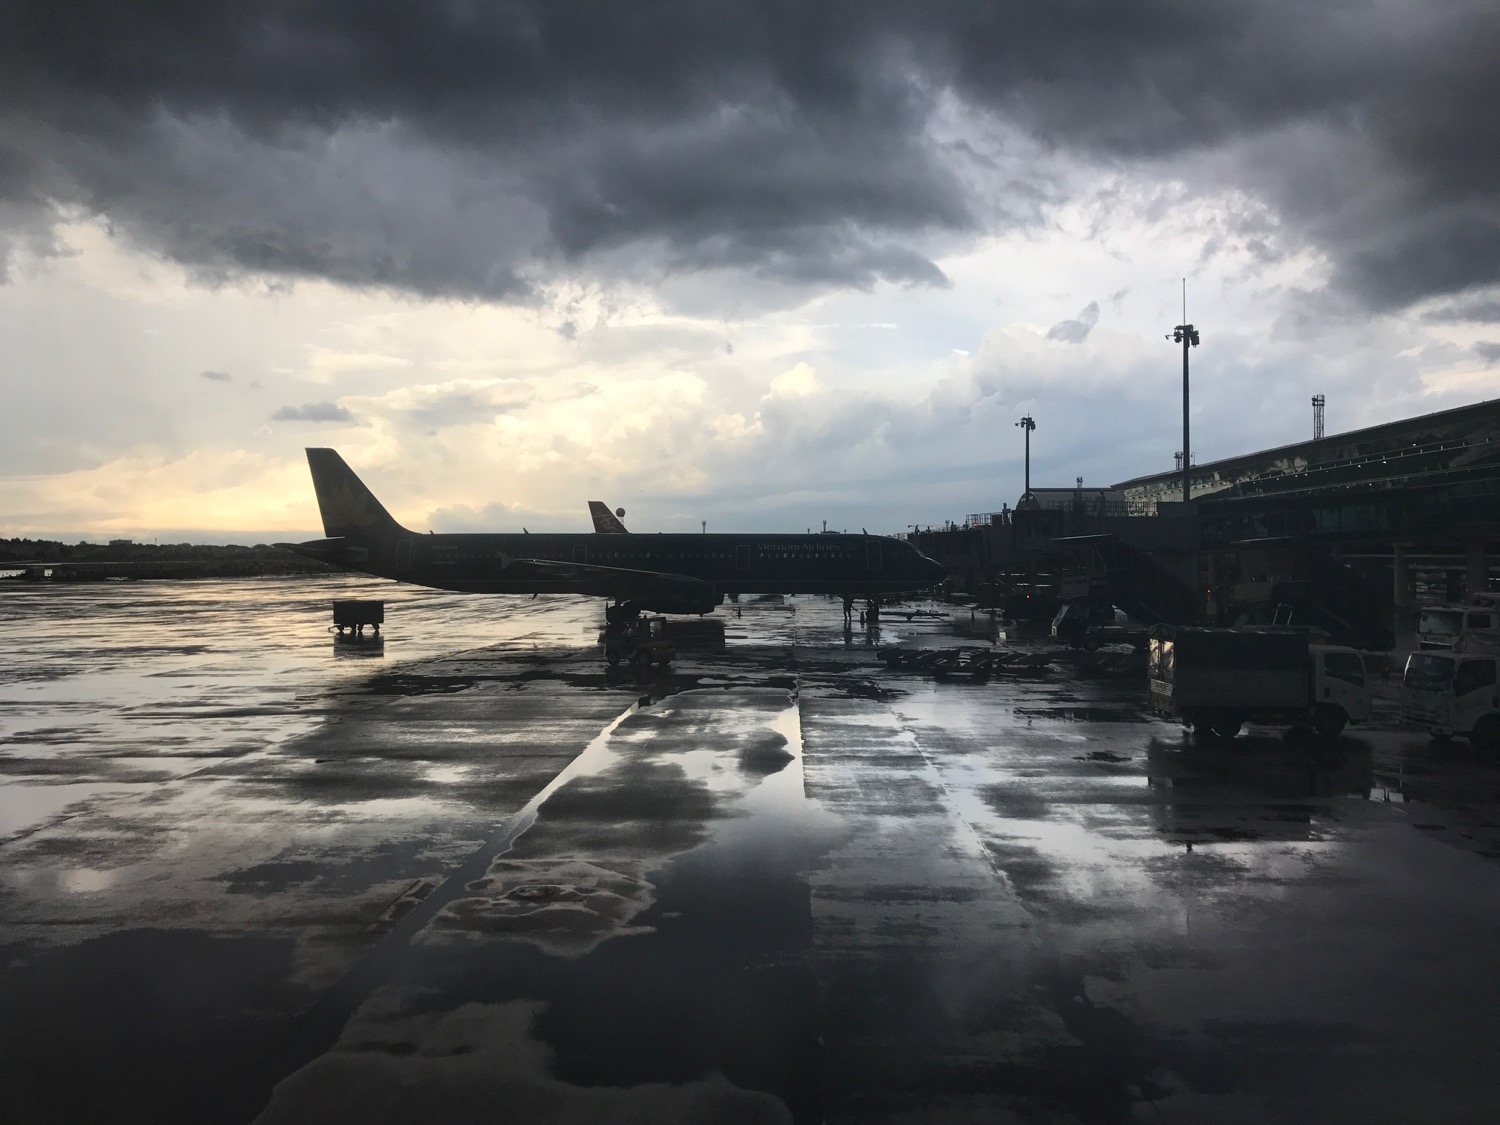 an airplane on a wet runway